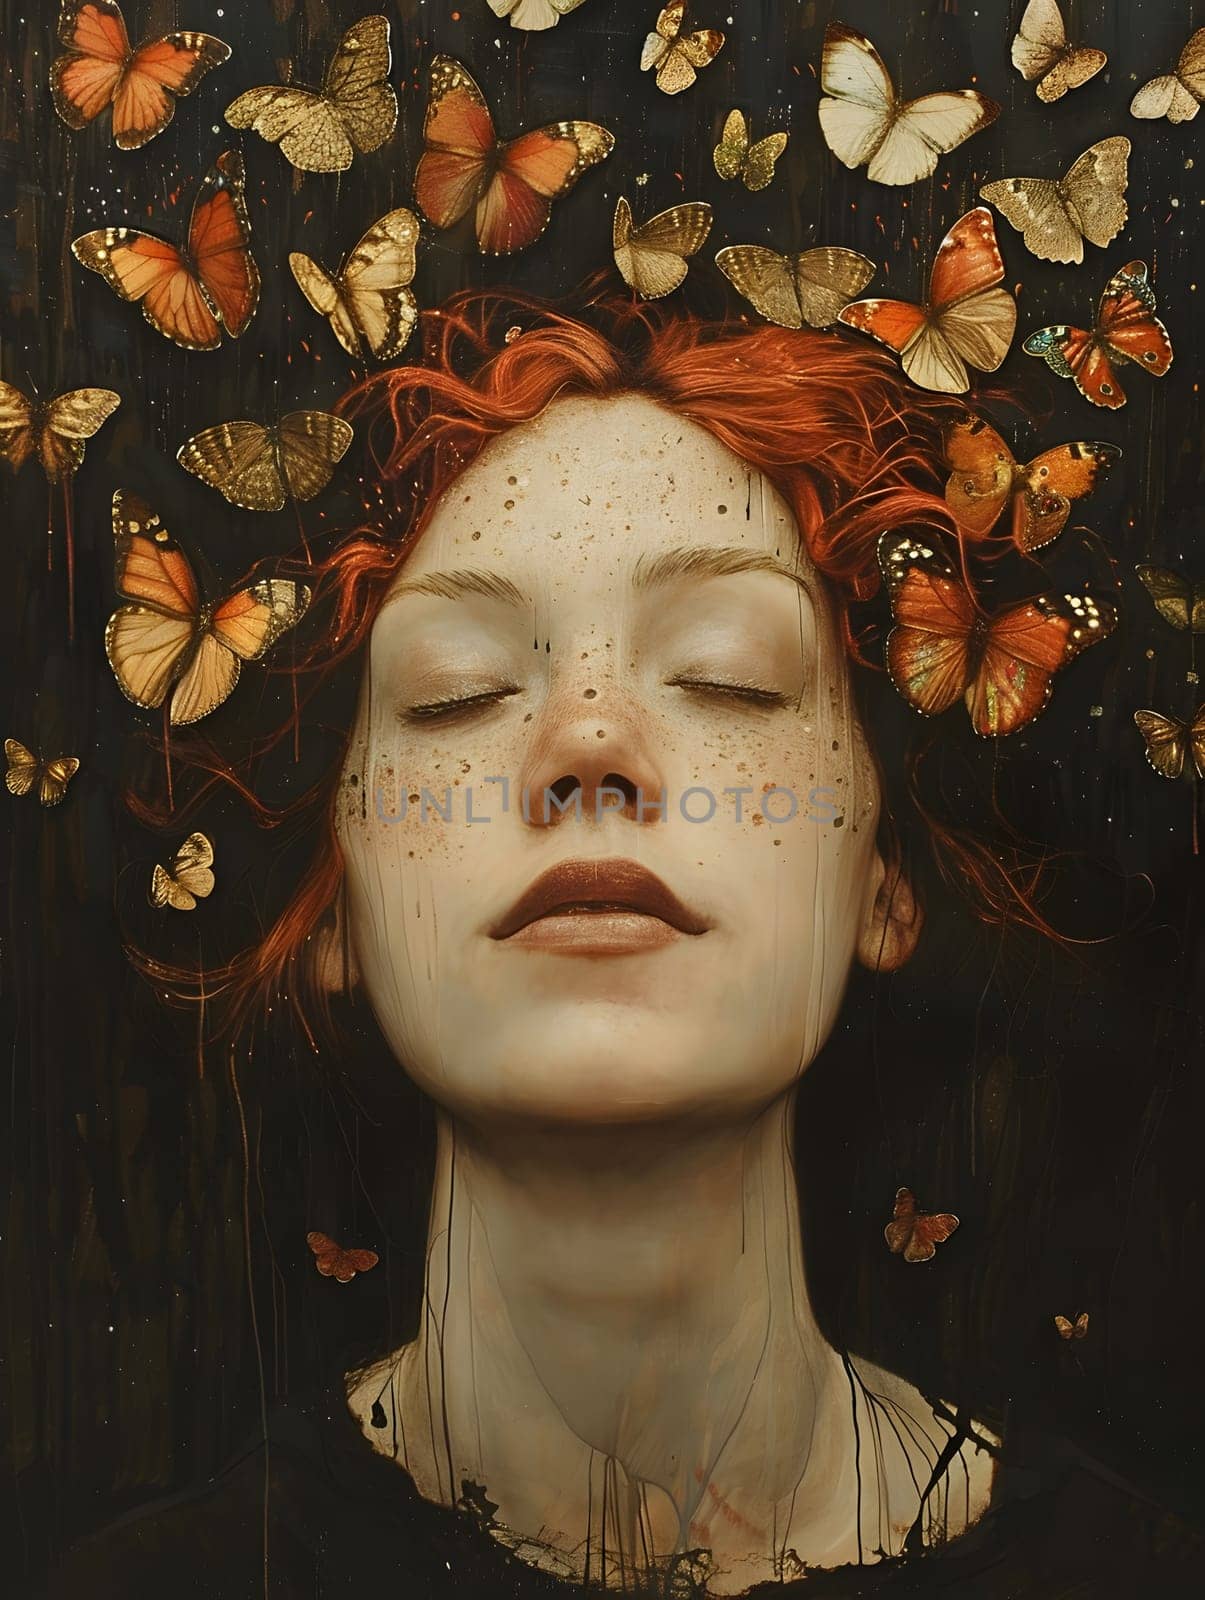 A woman with crimson hair and freckles is encircled by a fluttering of butterflies, creating a stunning visual arts display resembling a painting or sculpture